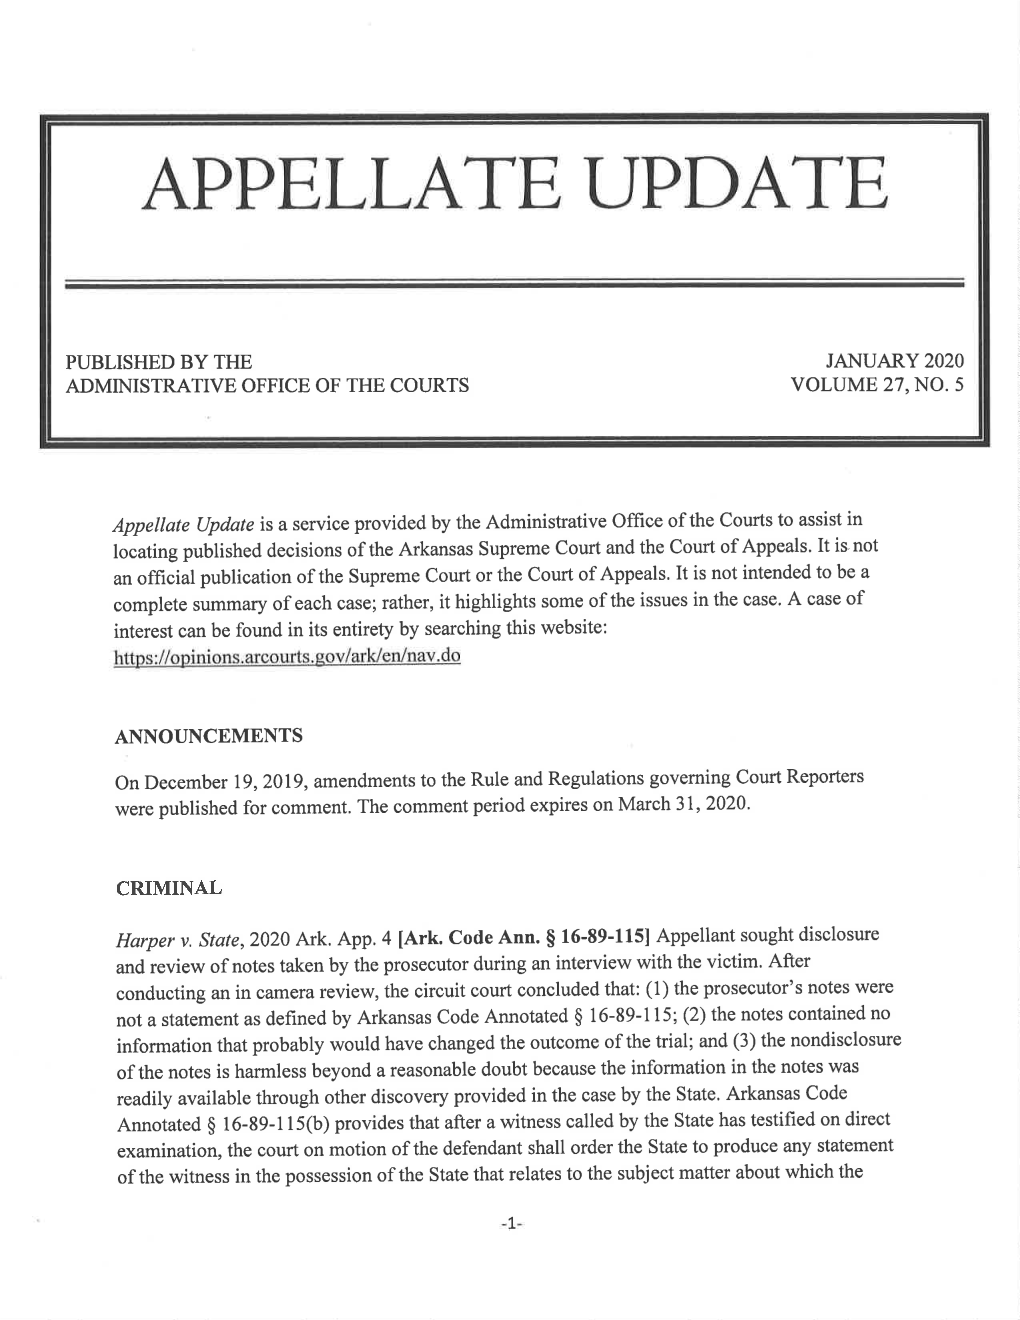 Appellate Update January 2020